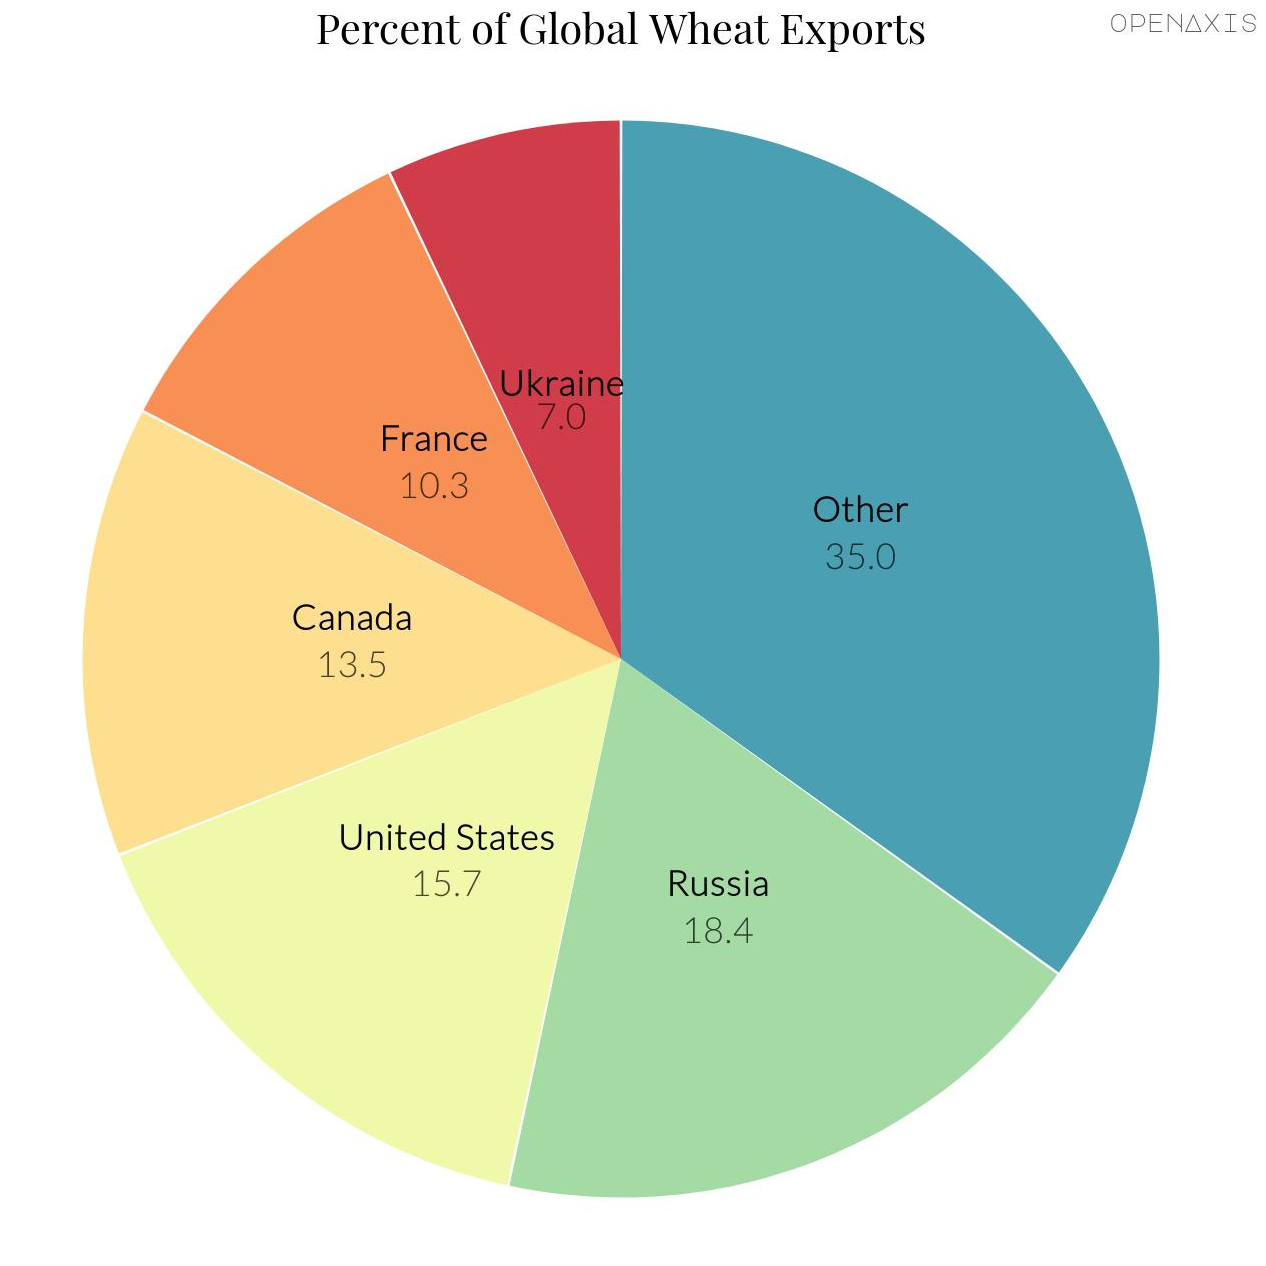 <p>Russia and Ukraine are both in the top 5 global wheat exporters </p><p><br /></p><p>In 2019 together they were responsible for 25% of wheat exports. In Axios, Nathan Bomey highlights what this means for <a href="https://www.axios.com/russia-ukraine-wheat-supplies-25ada311-cc08-4418-bdd2-d1b61ffe3cf8.html" target="_blank">global wheat prices</a>.</p><p><br /></p><p>﻿<a href="/search?q=%23wheat" target="_self">#wheat</a>﻿ ﻿<a href="/search?q=%23ukraine" target="_self">#ukraine</a>﻿ ﻿<a href="/search?q=%23russia" target="_self">#russia</a>﻿ ﻿<a href="/search?q=%23economy" target="_self">#economy</a>﻿ </p>